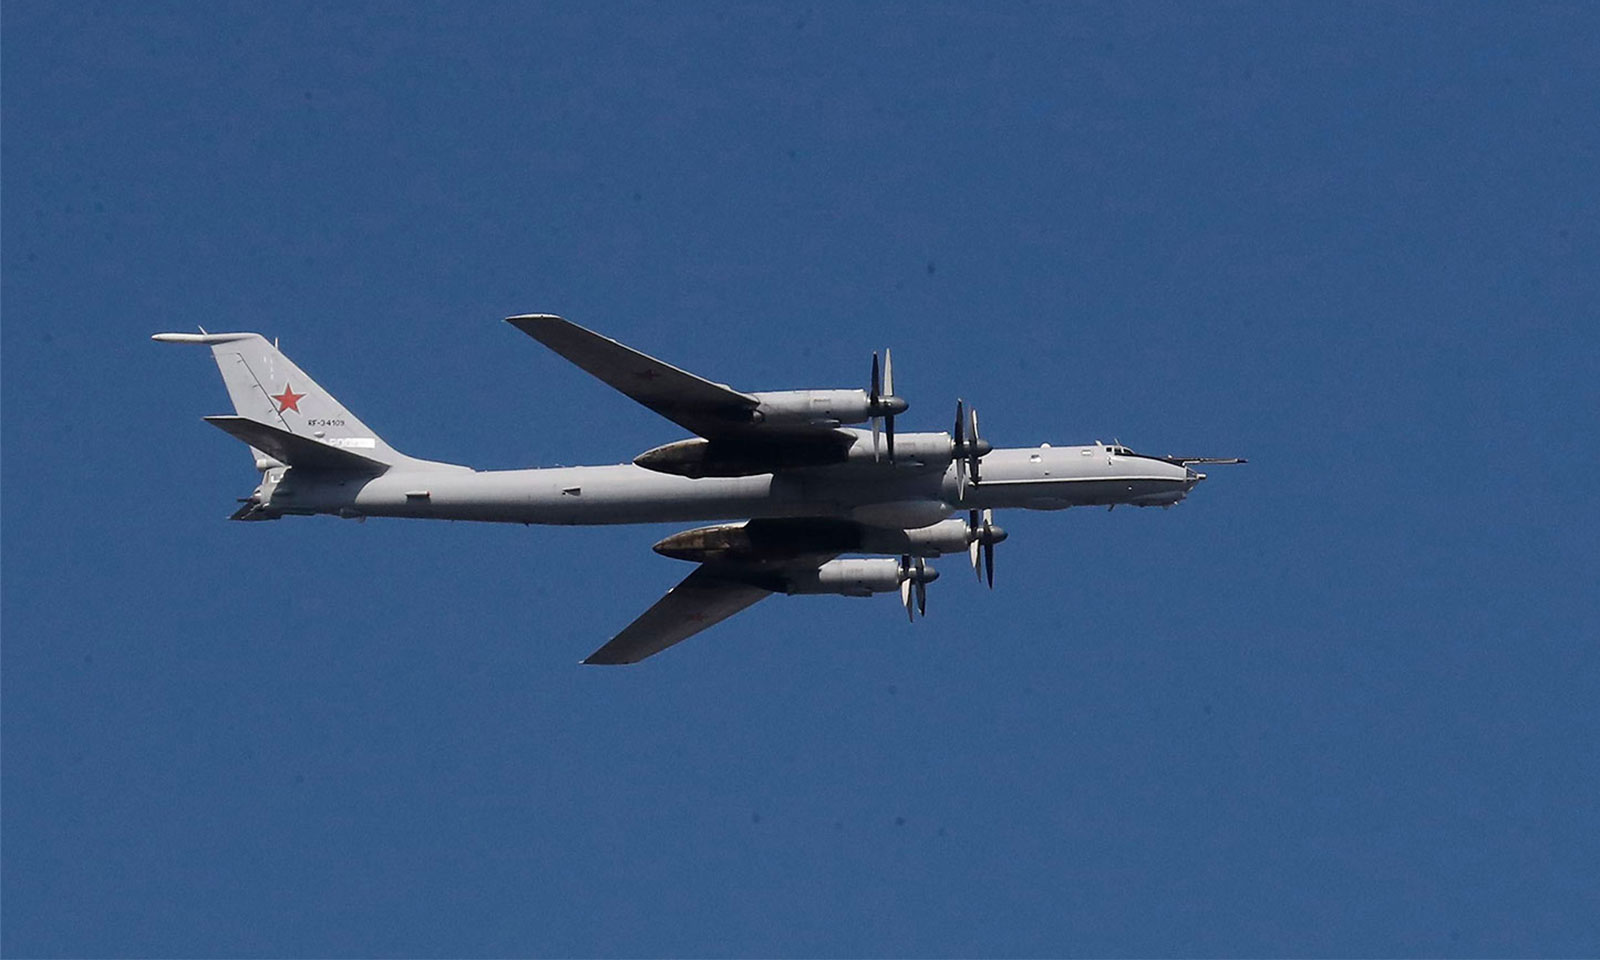 A Russian strategic bomber and missile platform TU-95 'Bear' flies past during a rehearsal for a 'Russia Navy Day' parade in St. Petersburg, Russia, in 2019. Two NORAD F-35s intercepted Russian TU-95 Bear bombers on Tuesday.